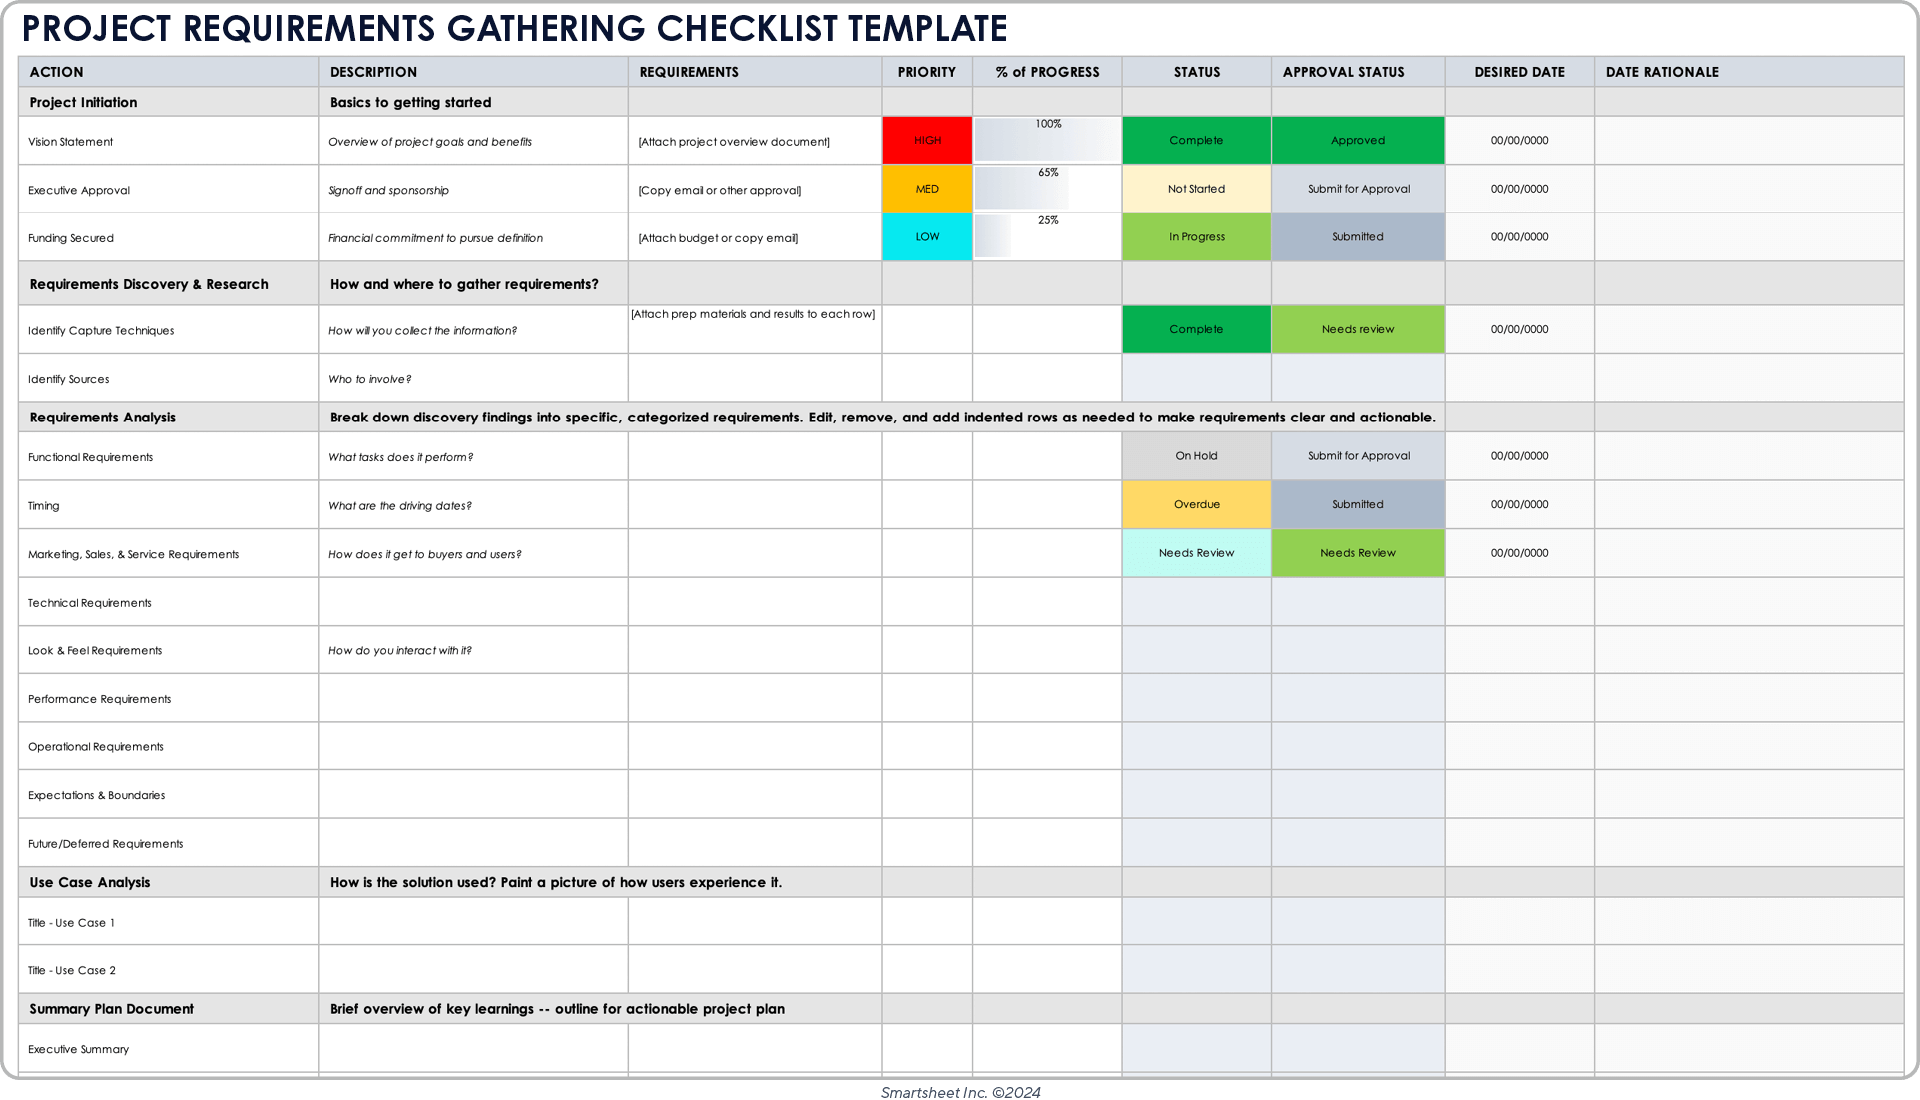 Project-Requirements Gathering Checklist Template